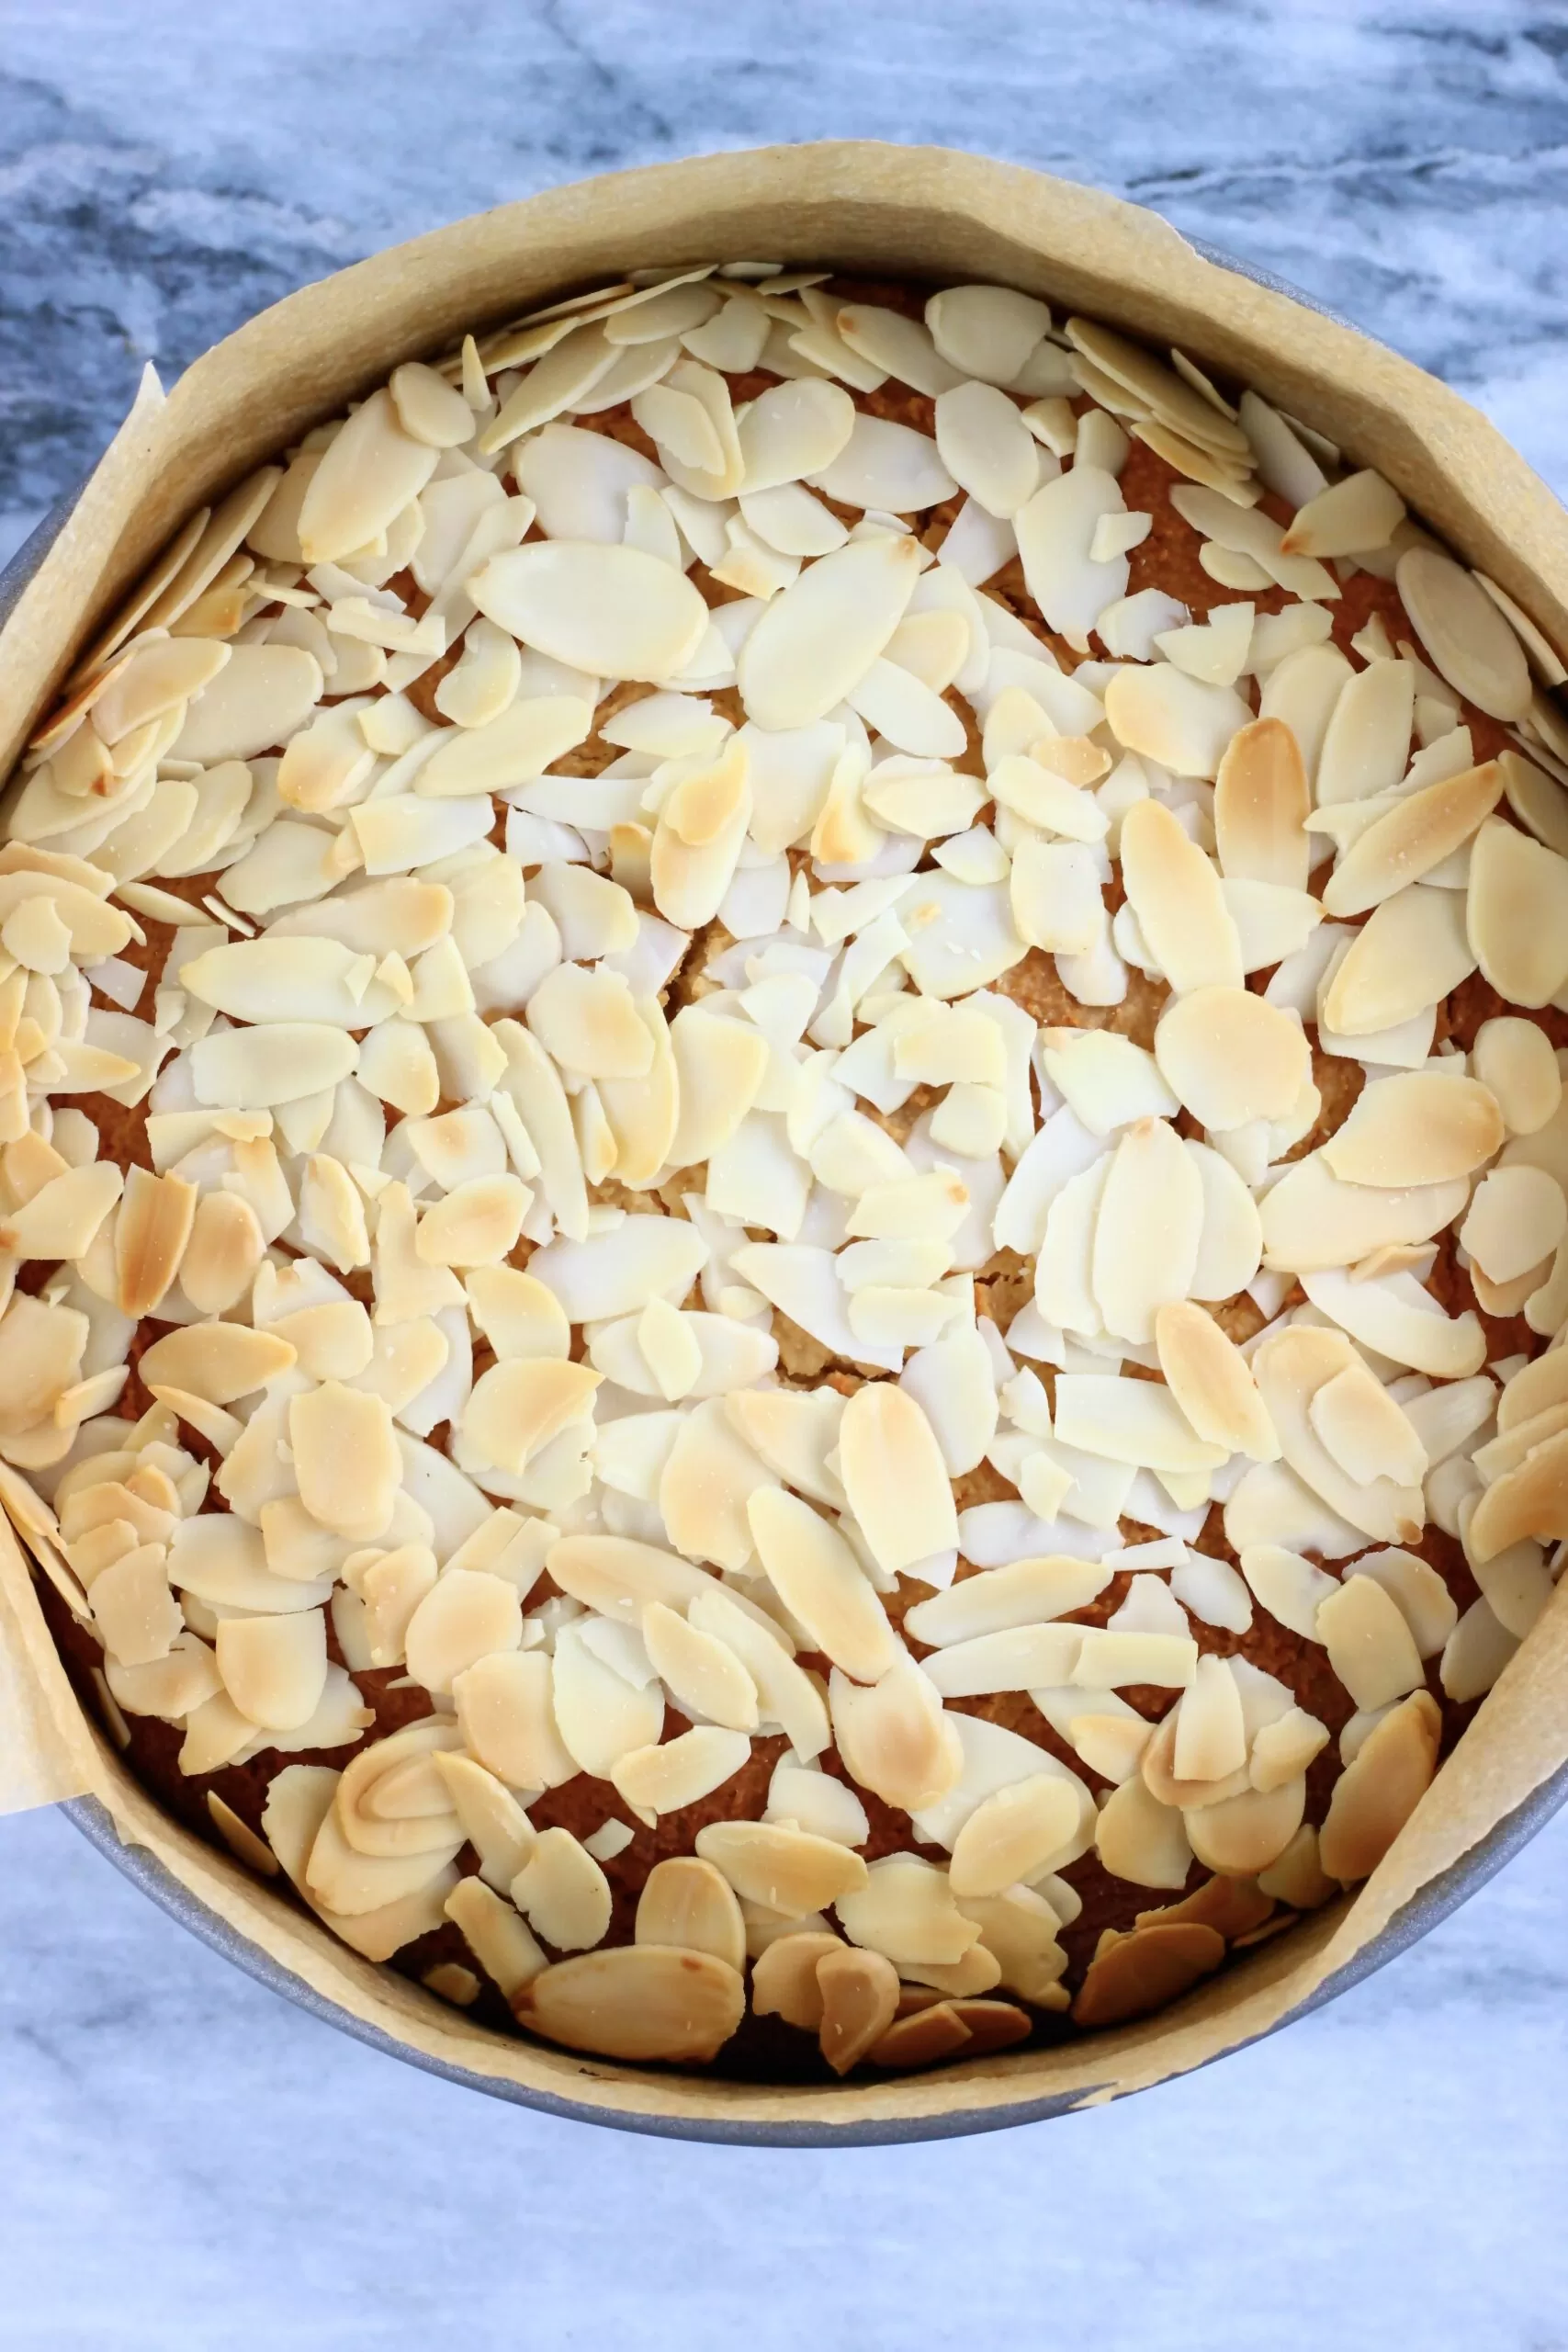 Baked gluten-free vegan almond cake in a springform baking tin lined with baking paper